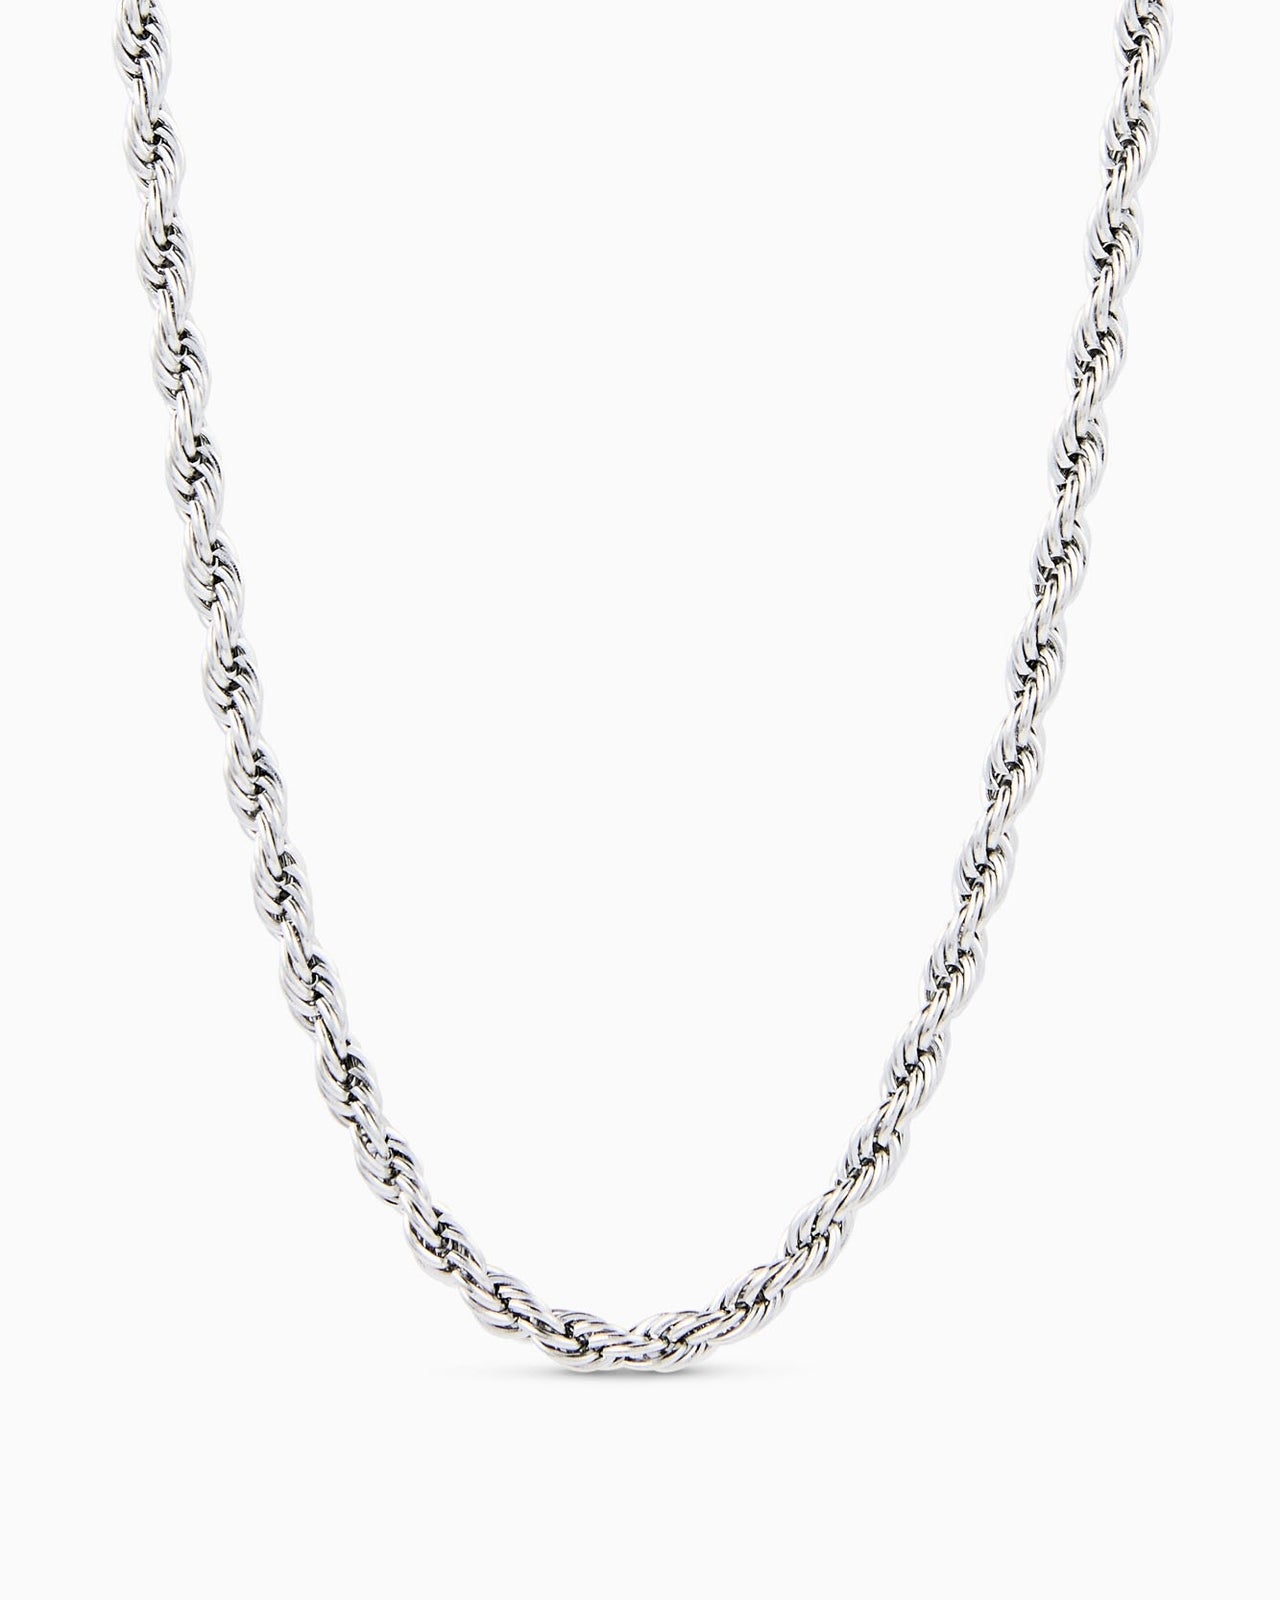 Rope Chain (Silver) 4mm